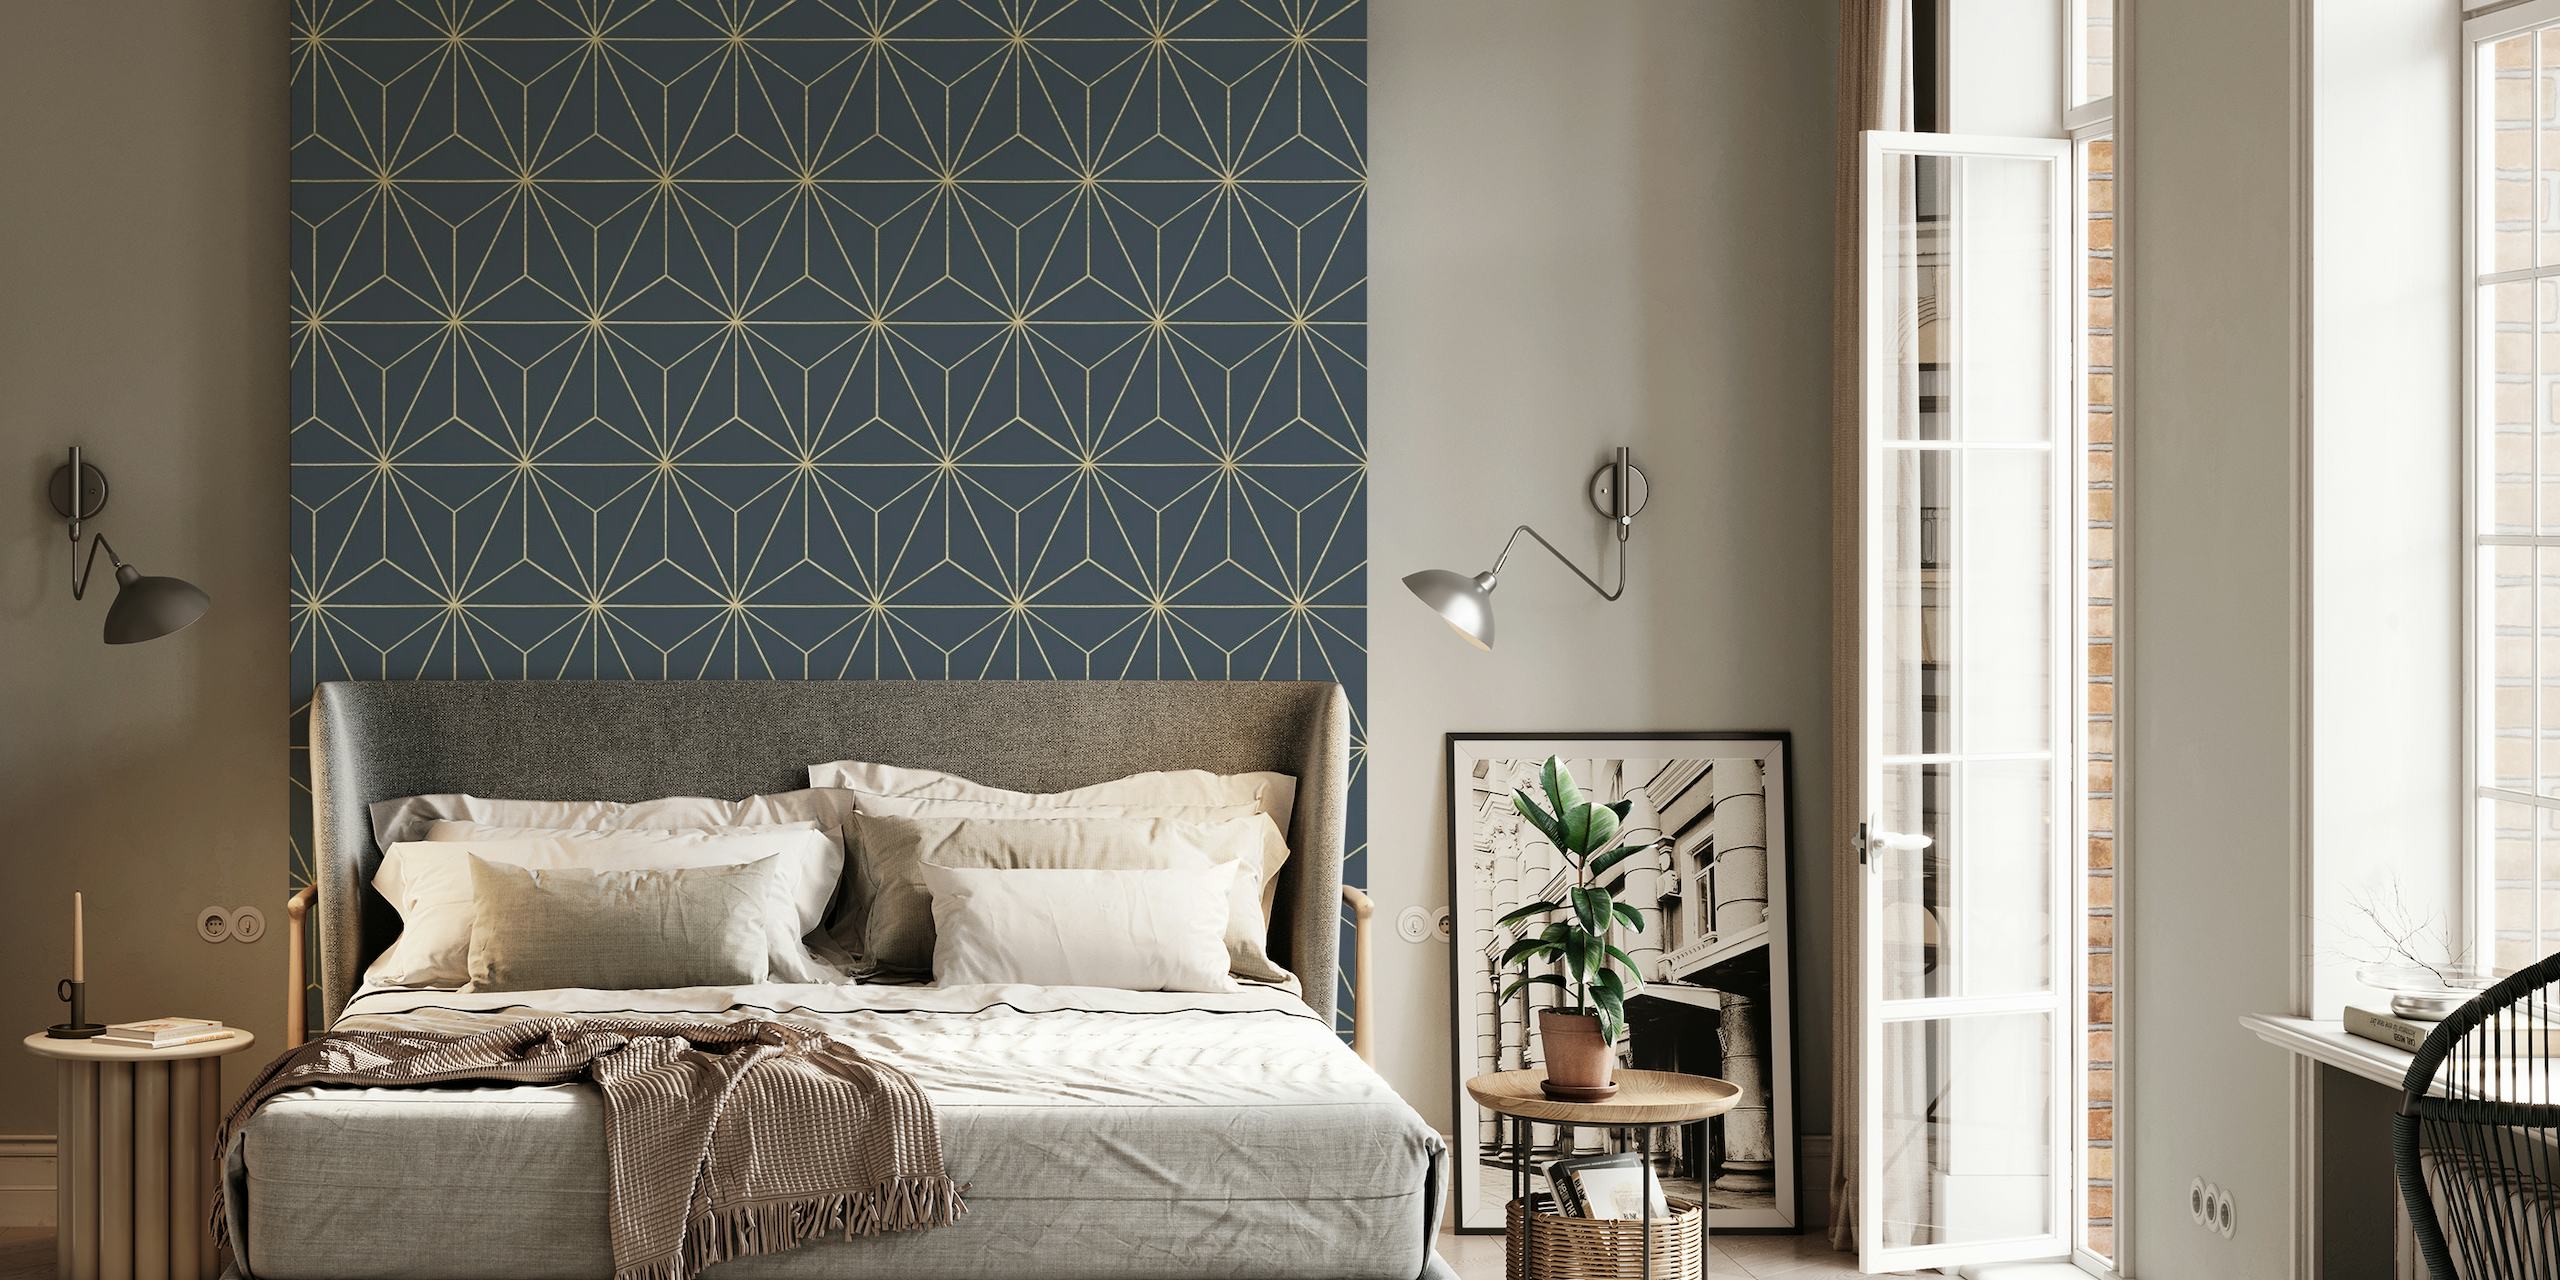 Geometric pattern wall mural in muted tones